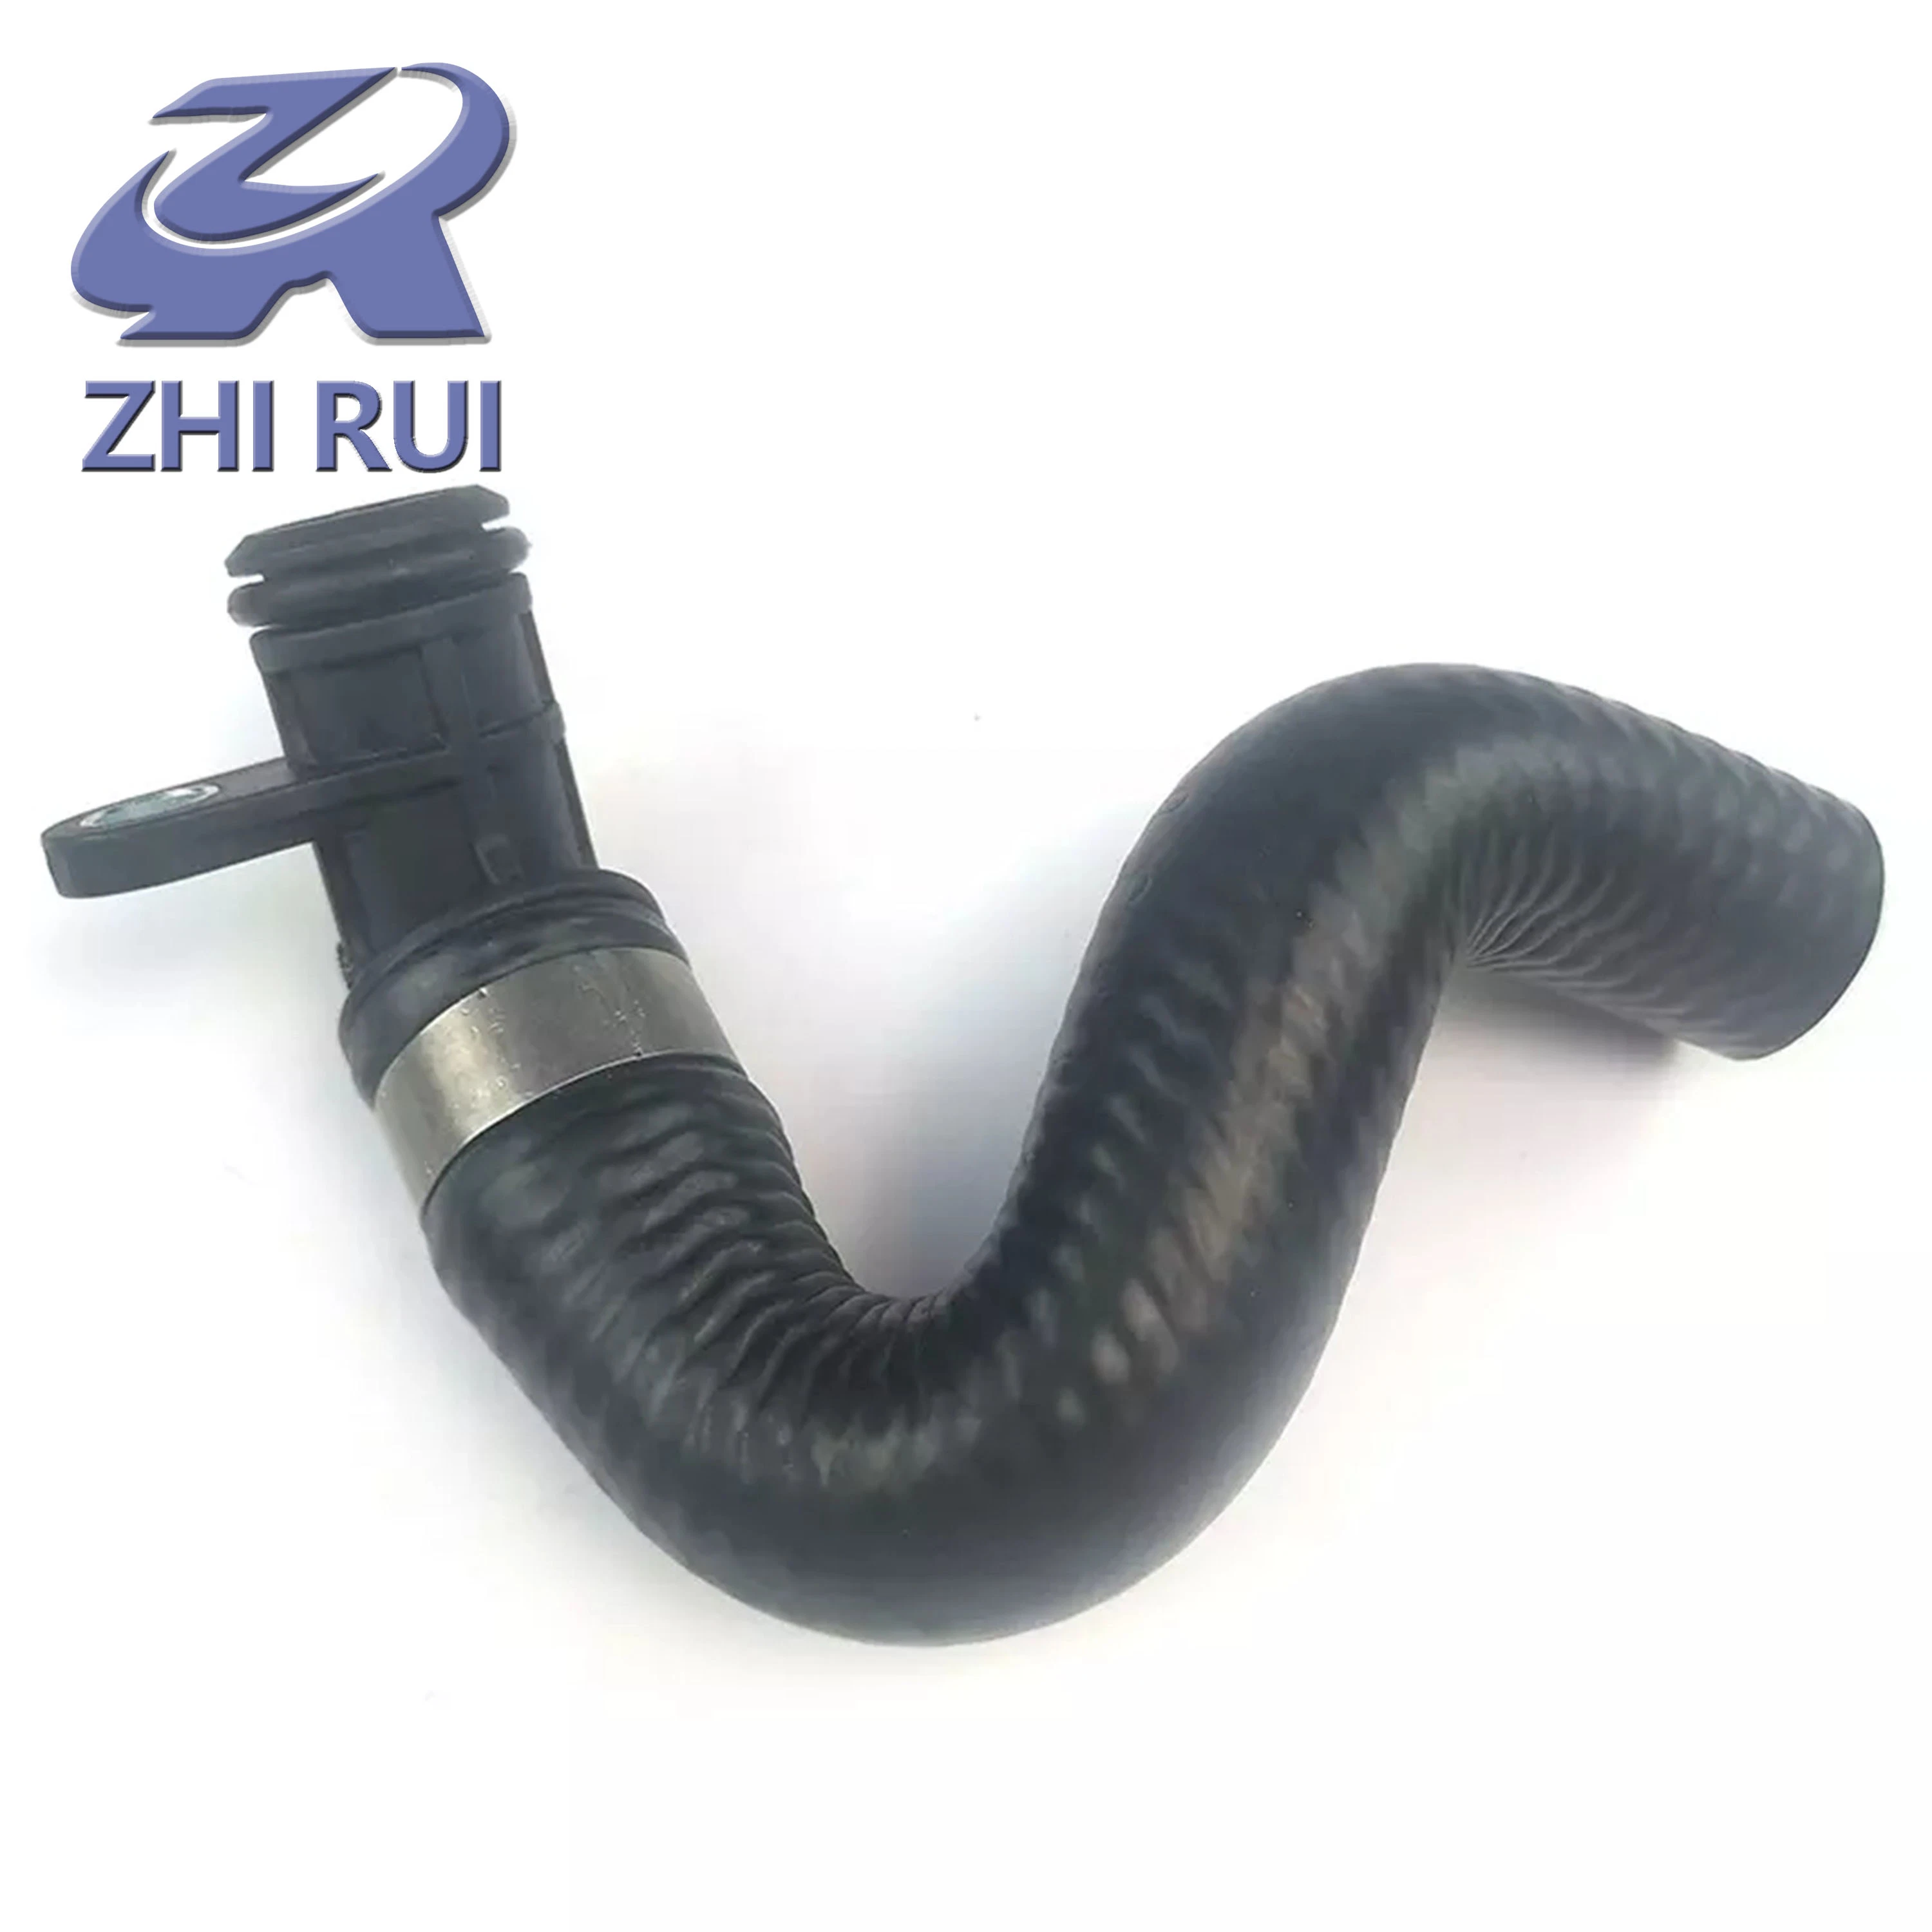 Auto Engine Radiator Coolant Hose Structure Cooling System Water Pipe for Auto Parts 3.2L 3.2L I6 Hse OEM Lr001442